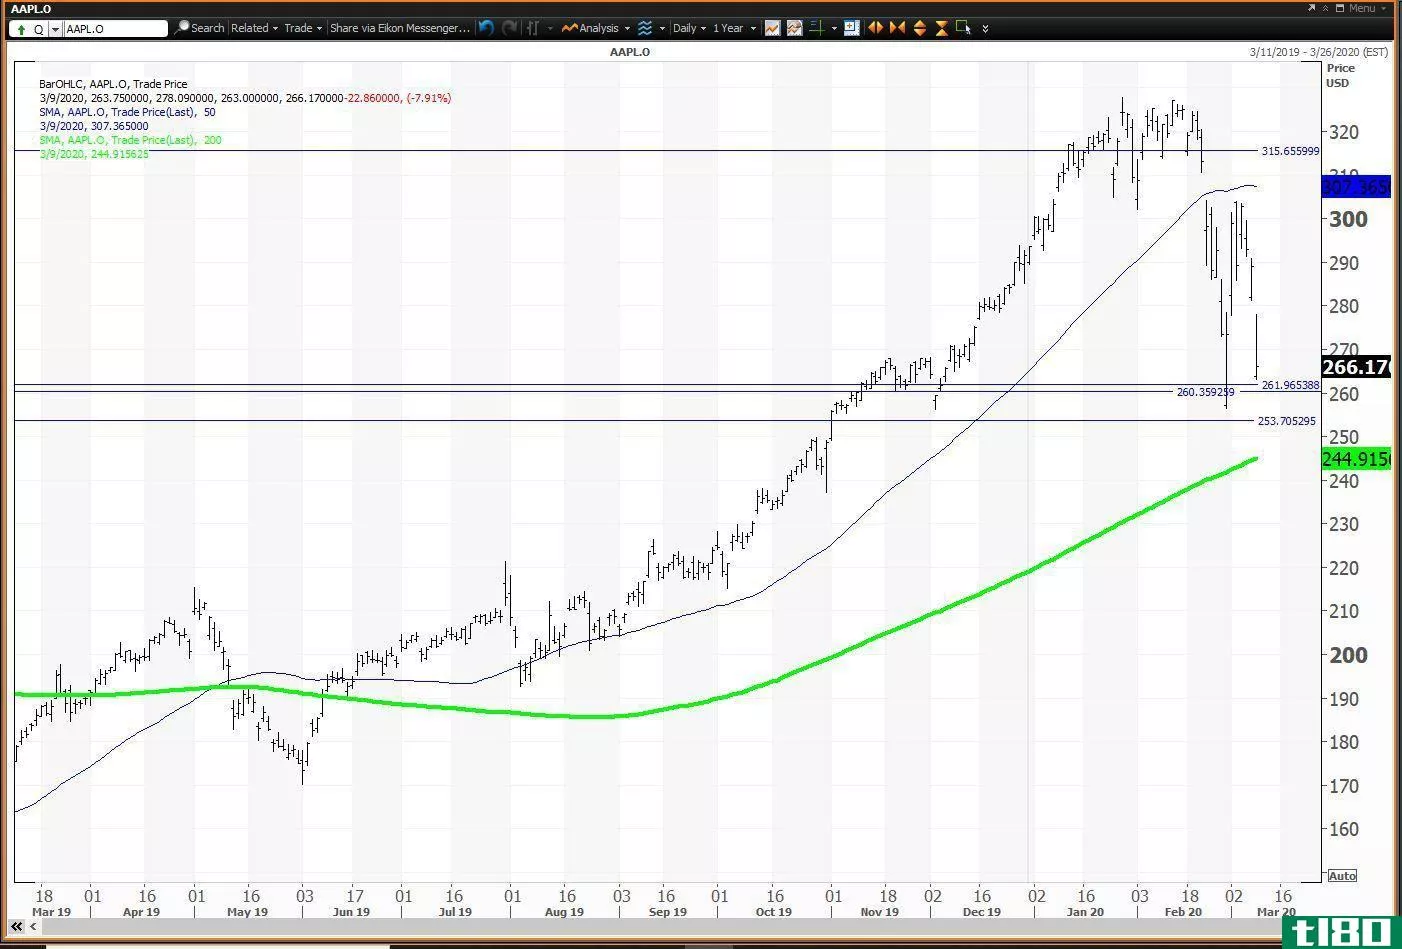 Daily chart showing the share price performance of Apple Inc. (AAPL)